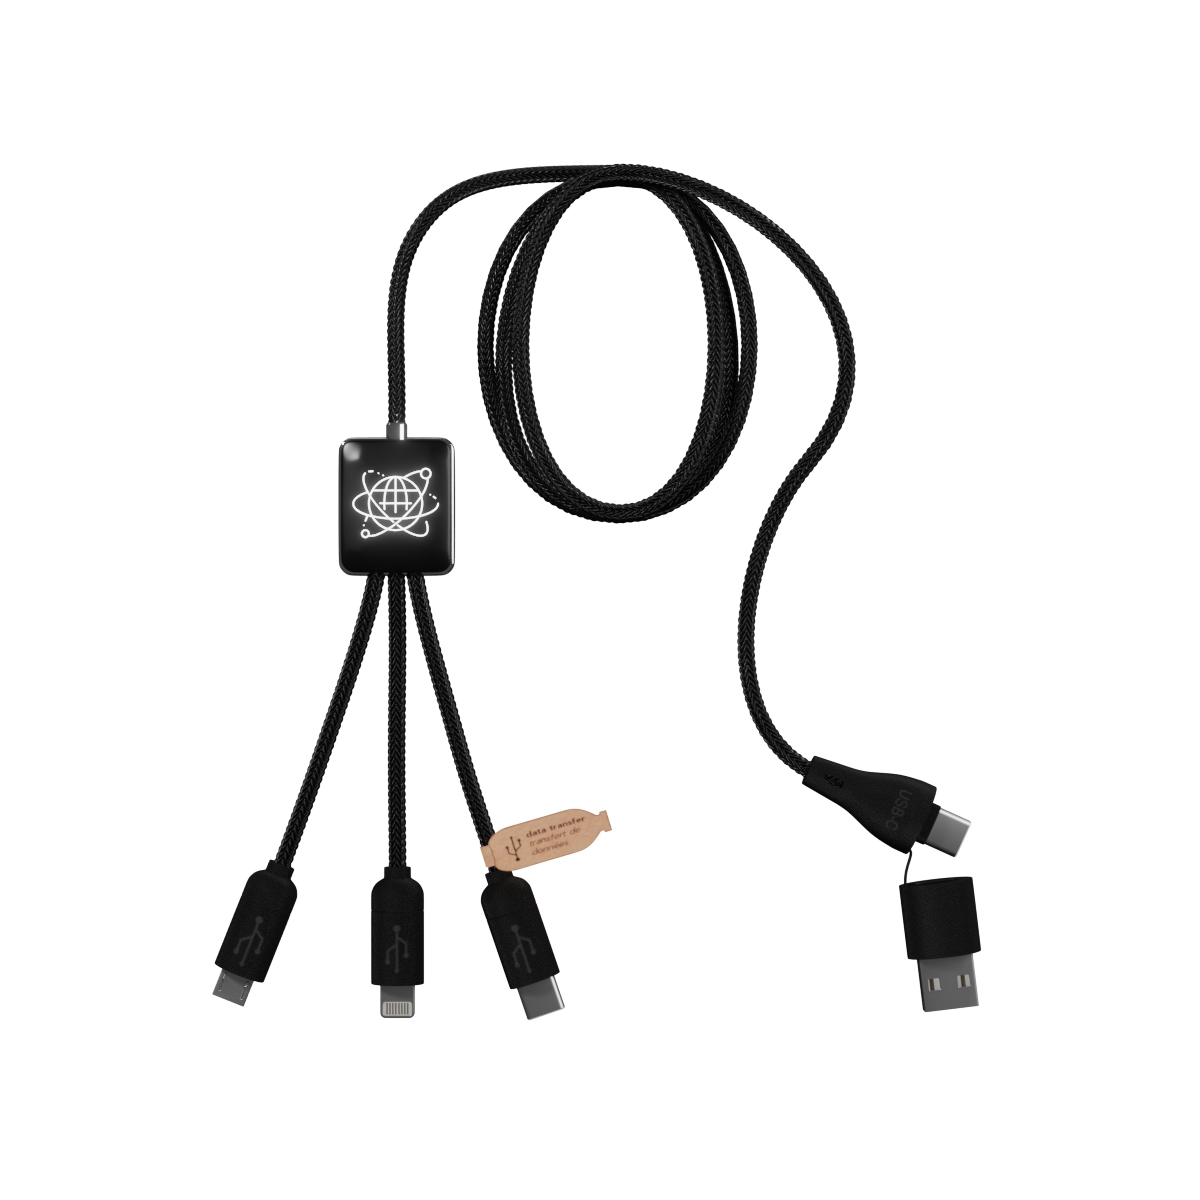 C45 - Data transfer eco cable